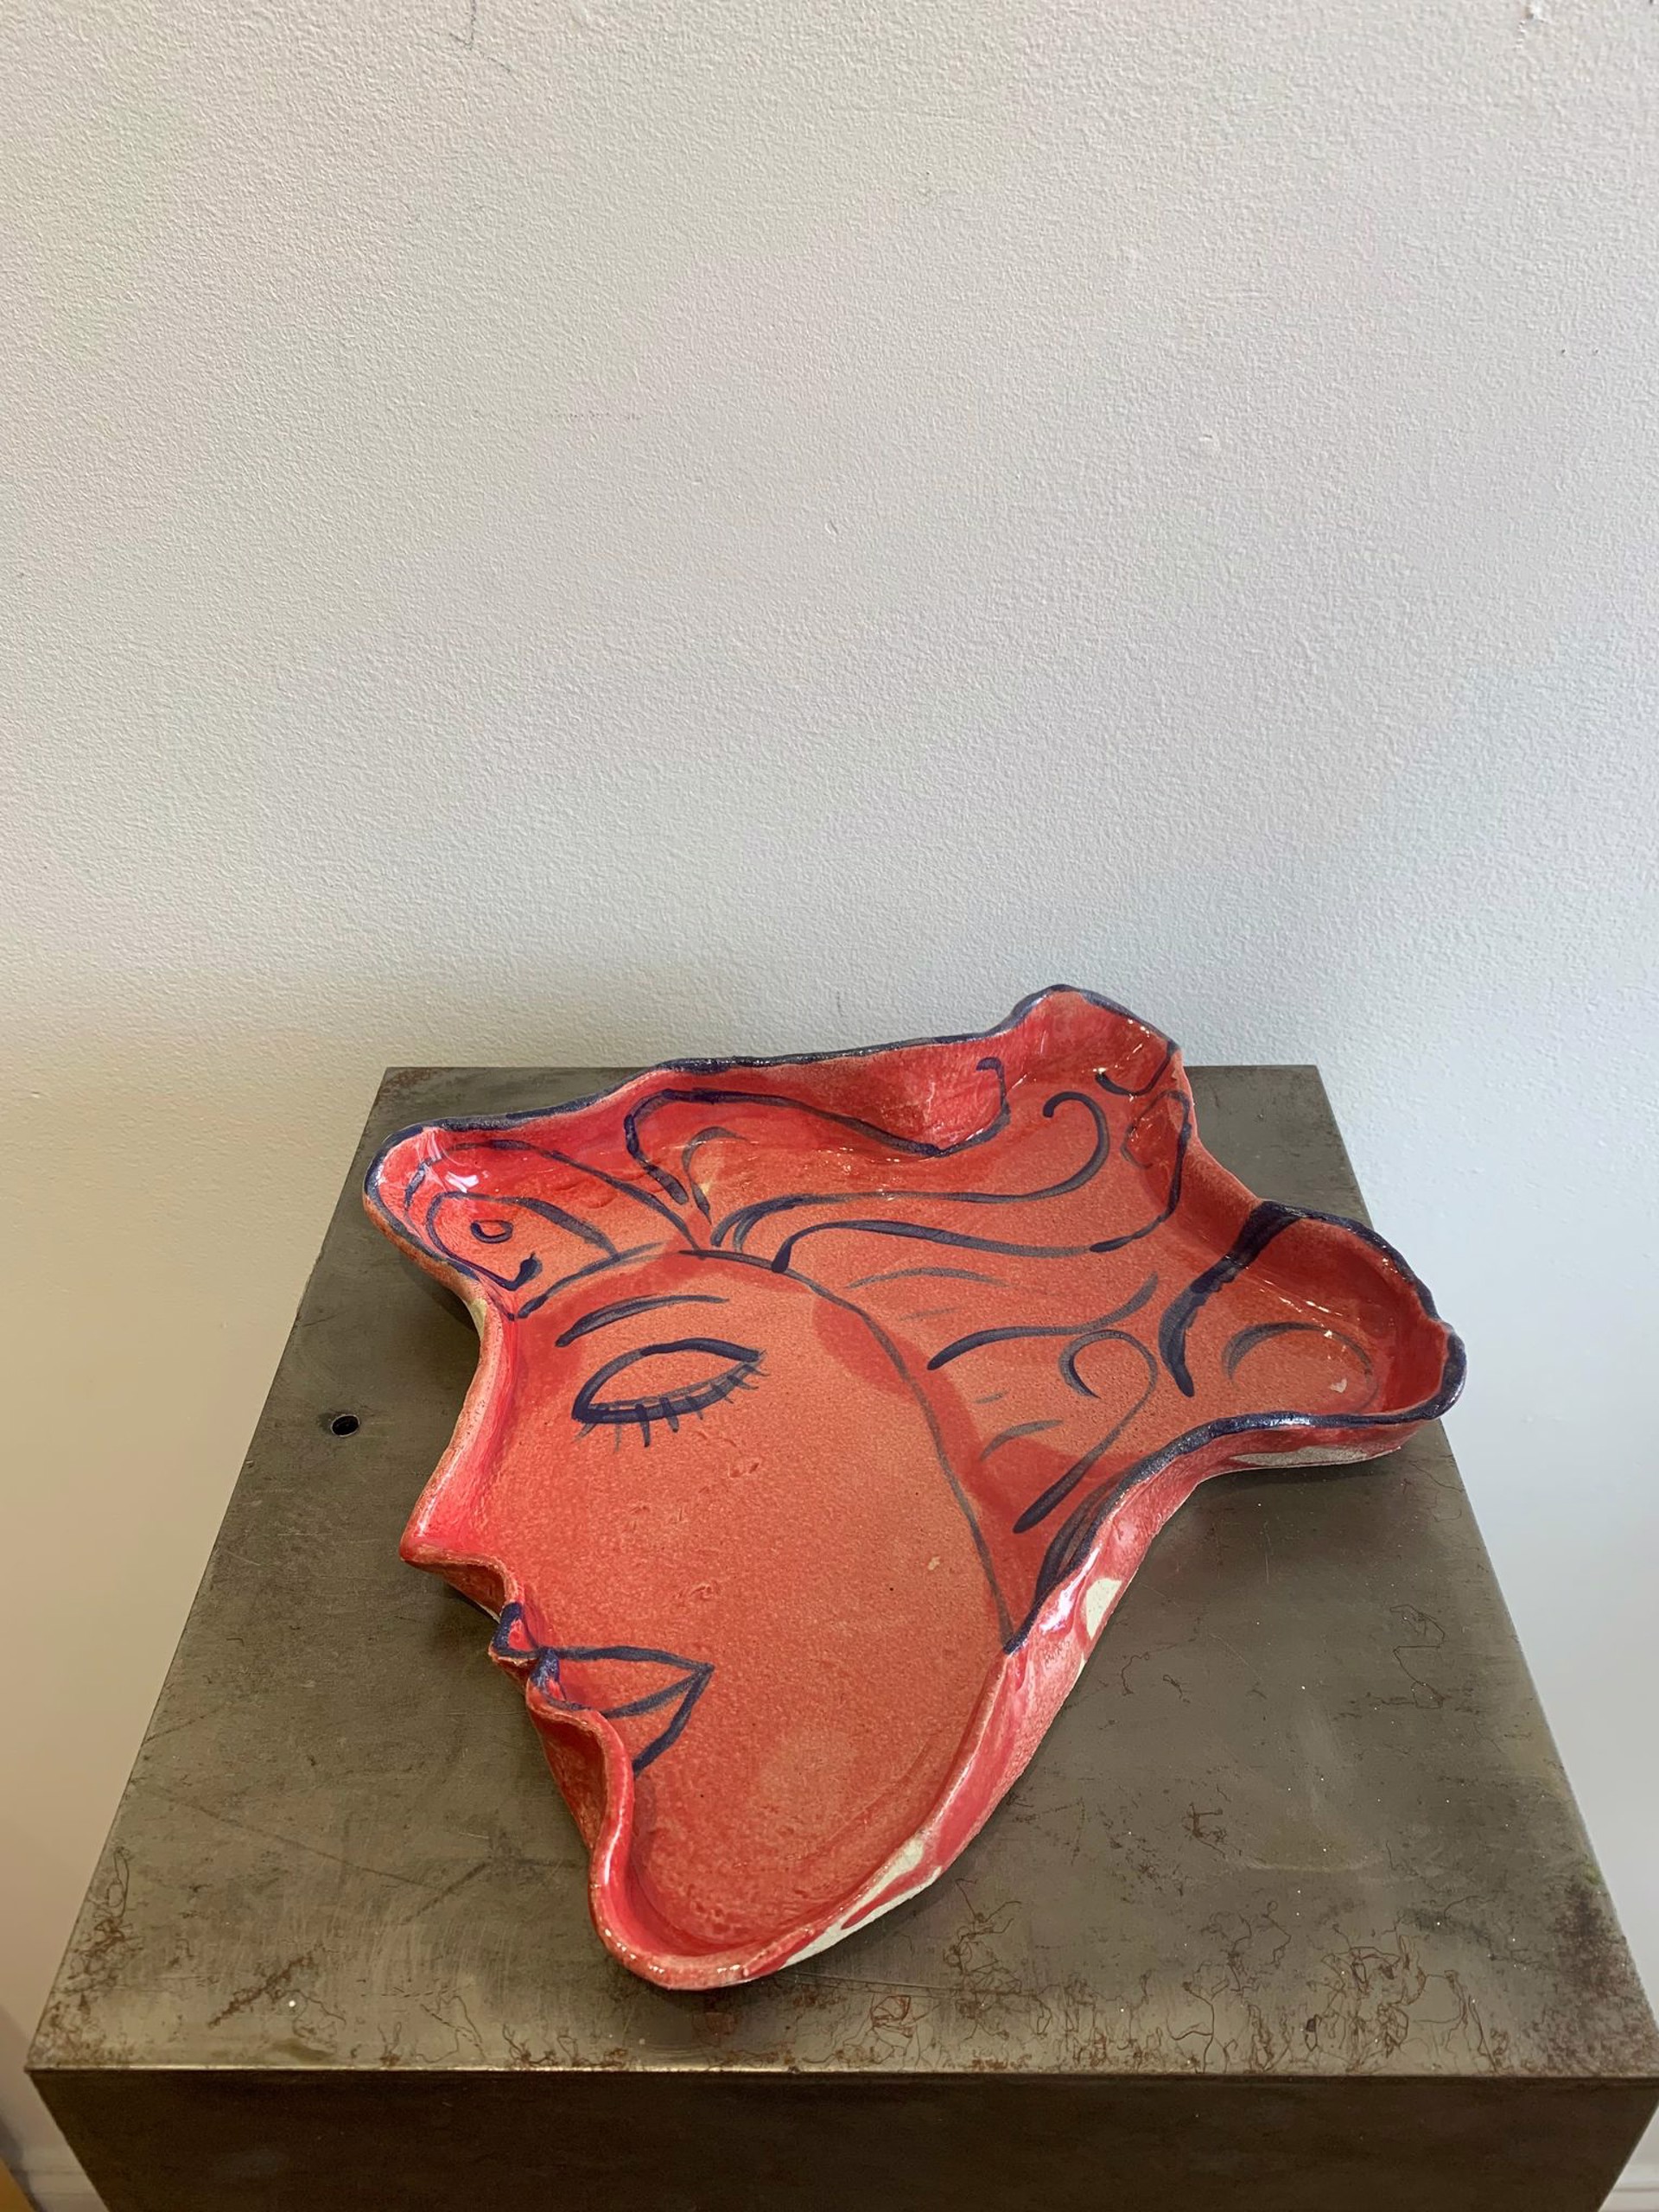 Red Face Plate by Renato Abbate and Anne McCombie